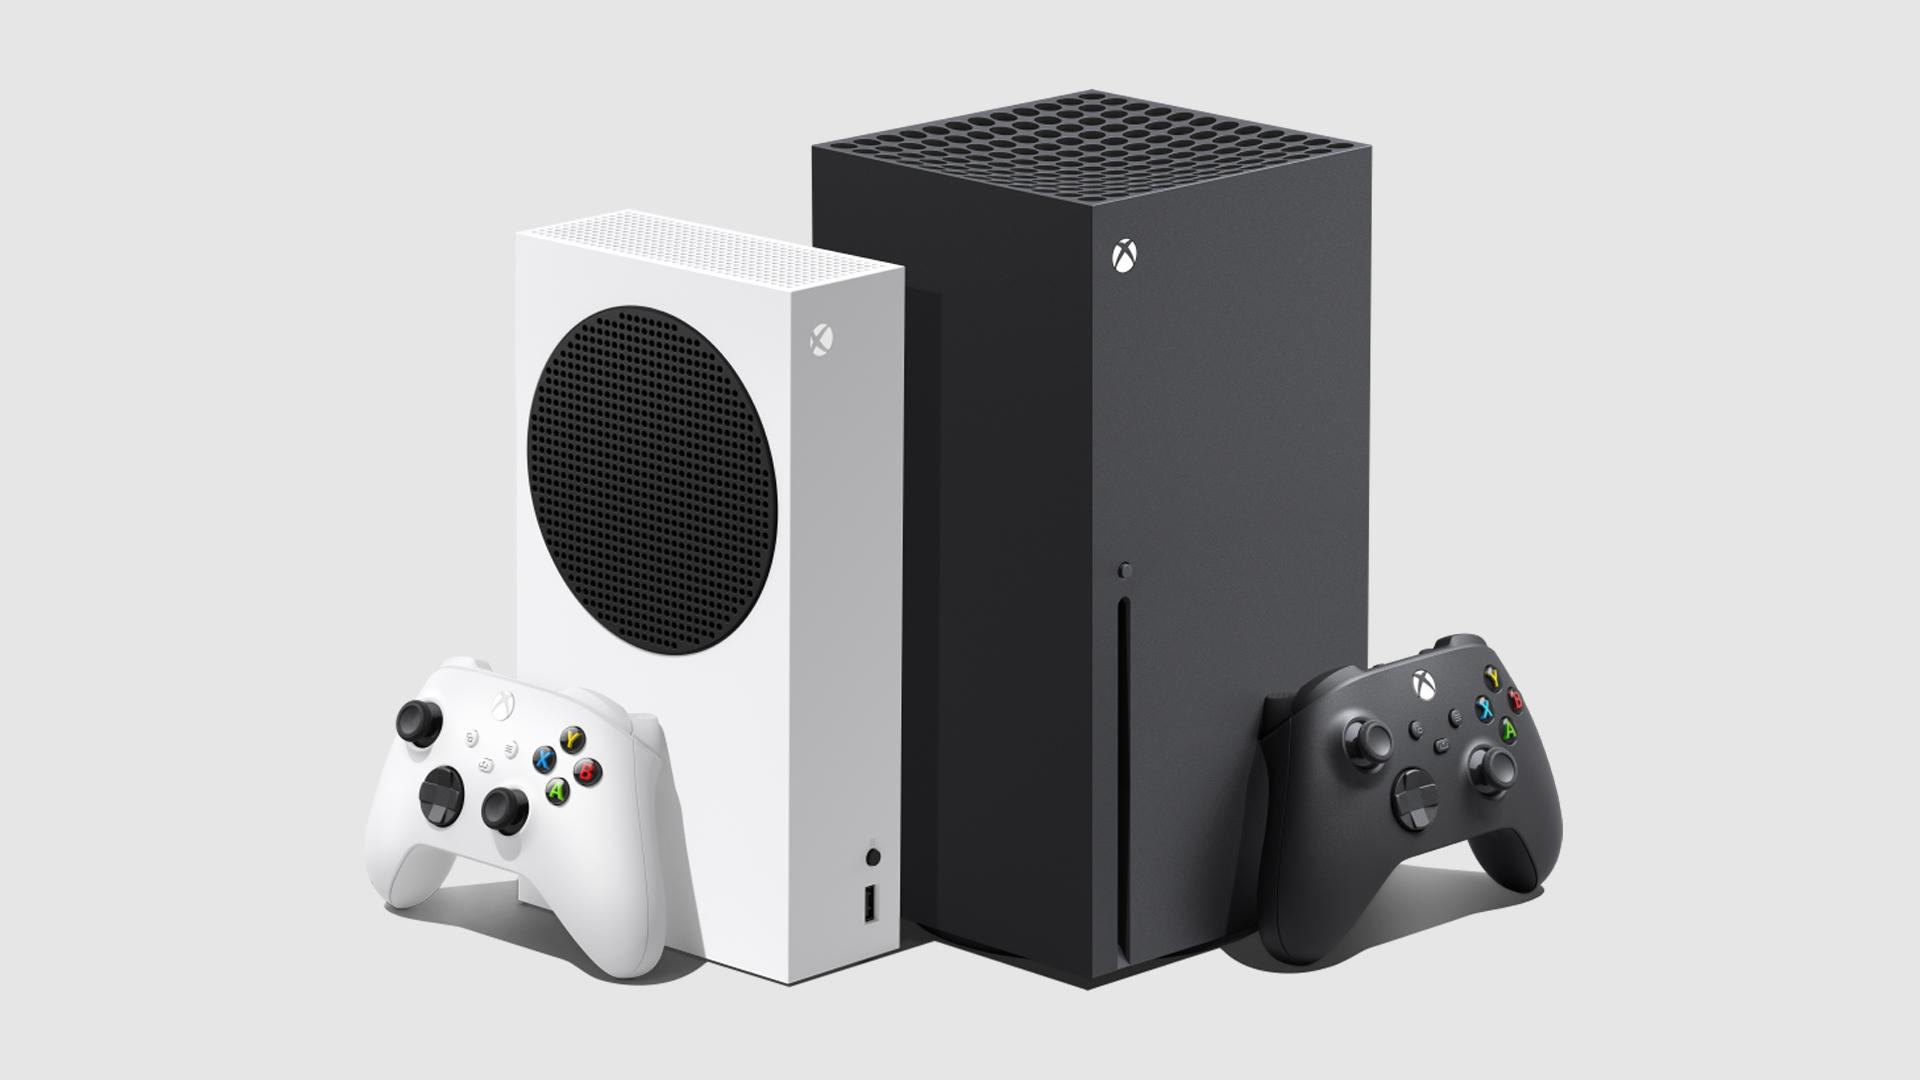 Xbox Series X: Details, Price, and Where To Buy In Ghana